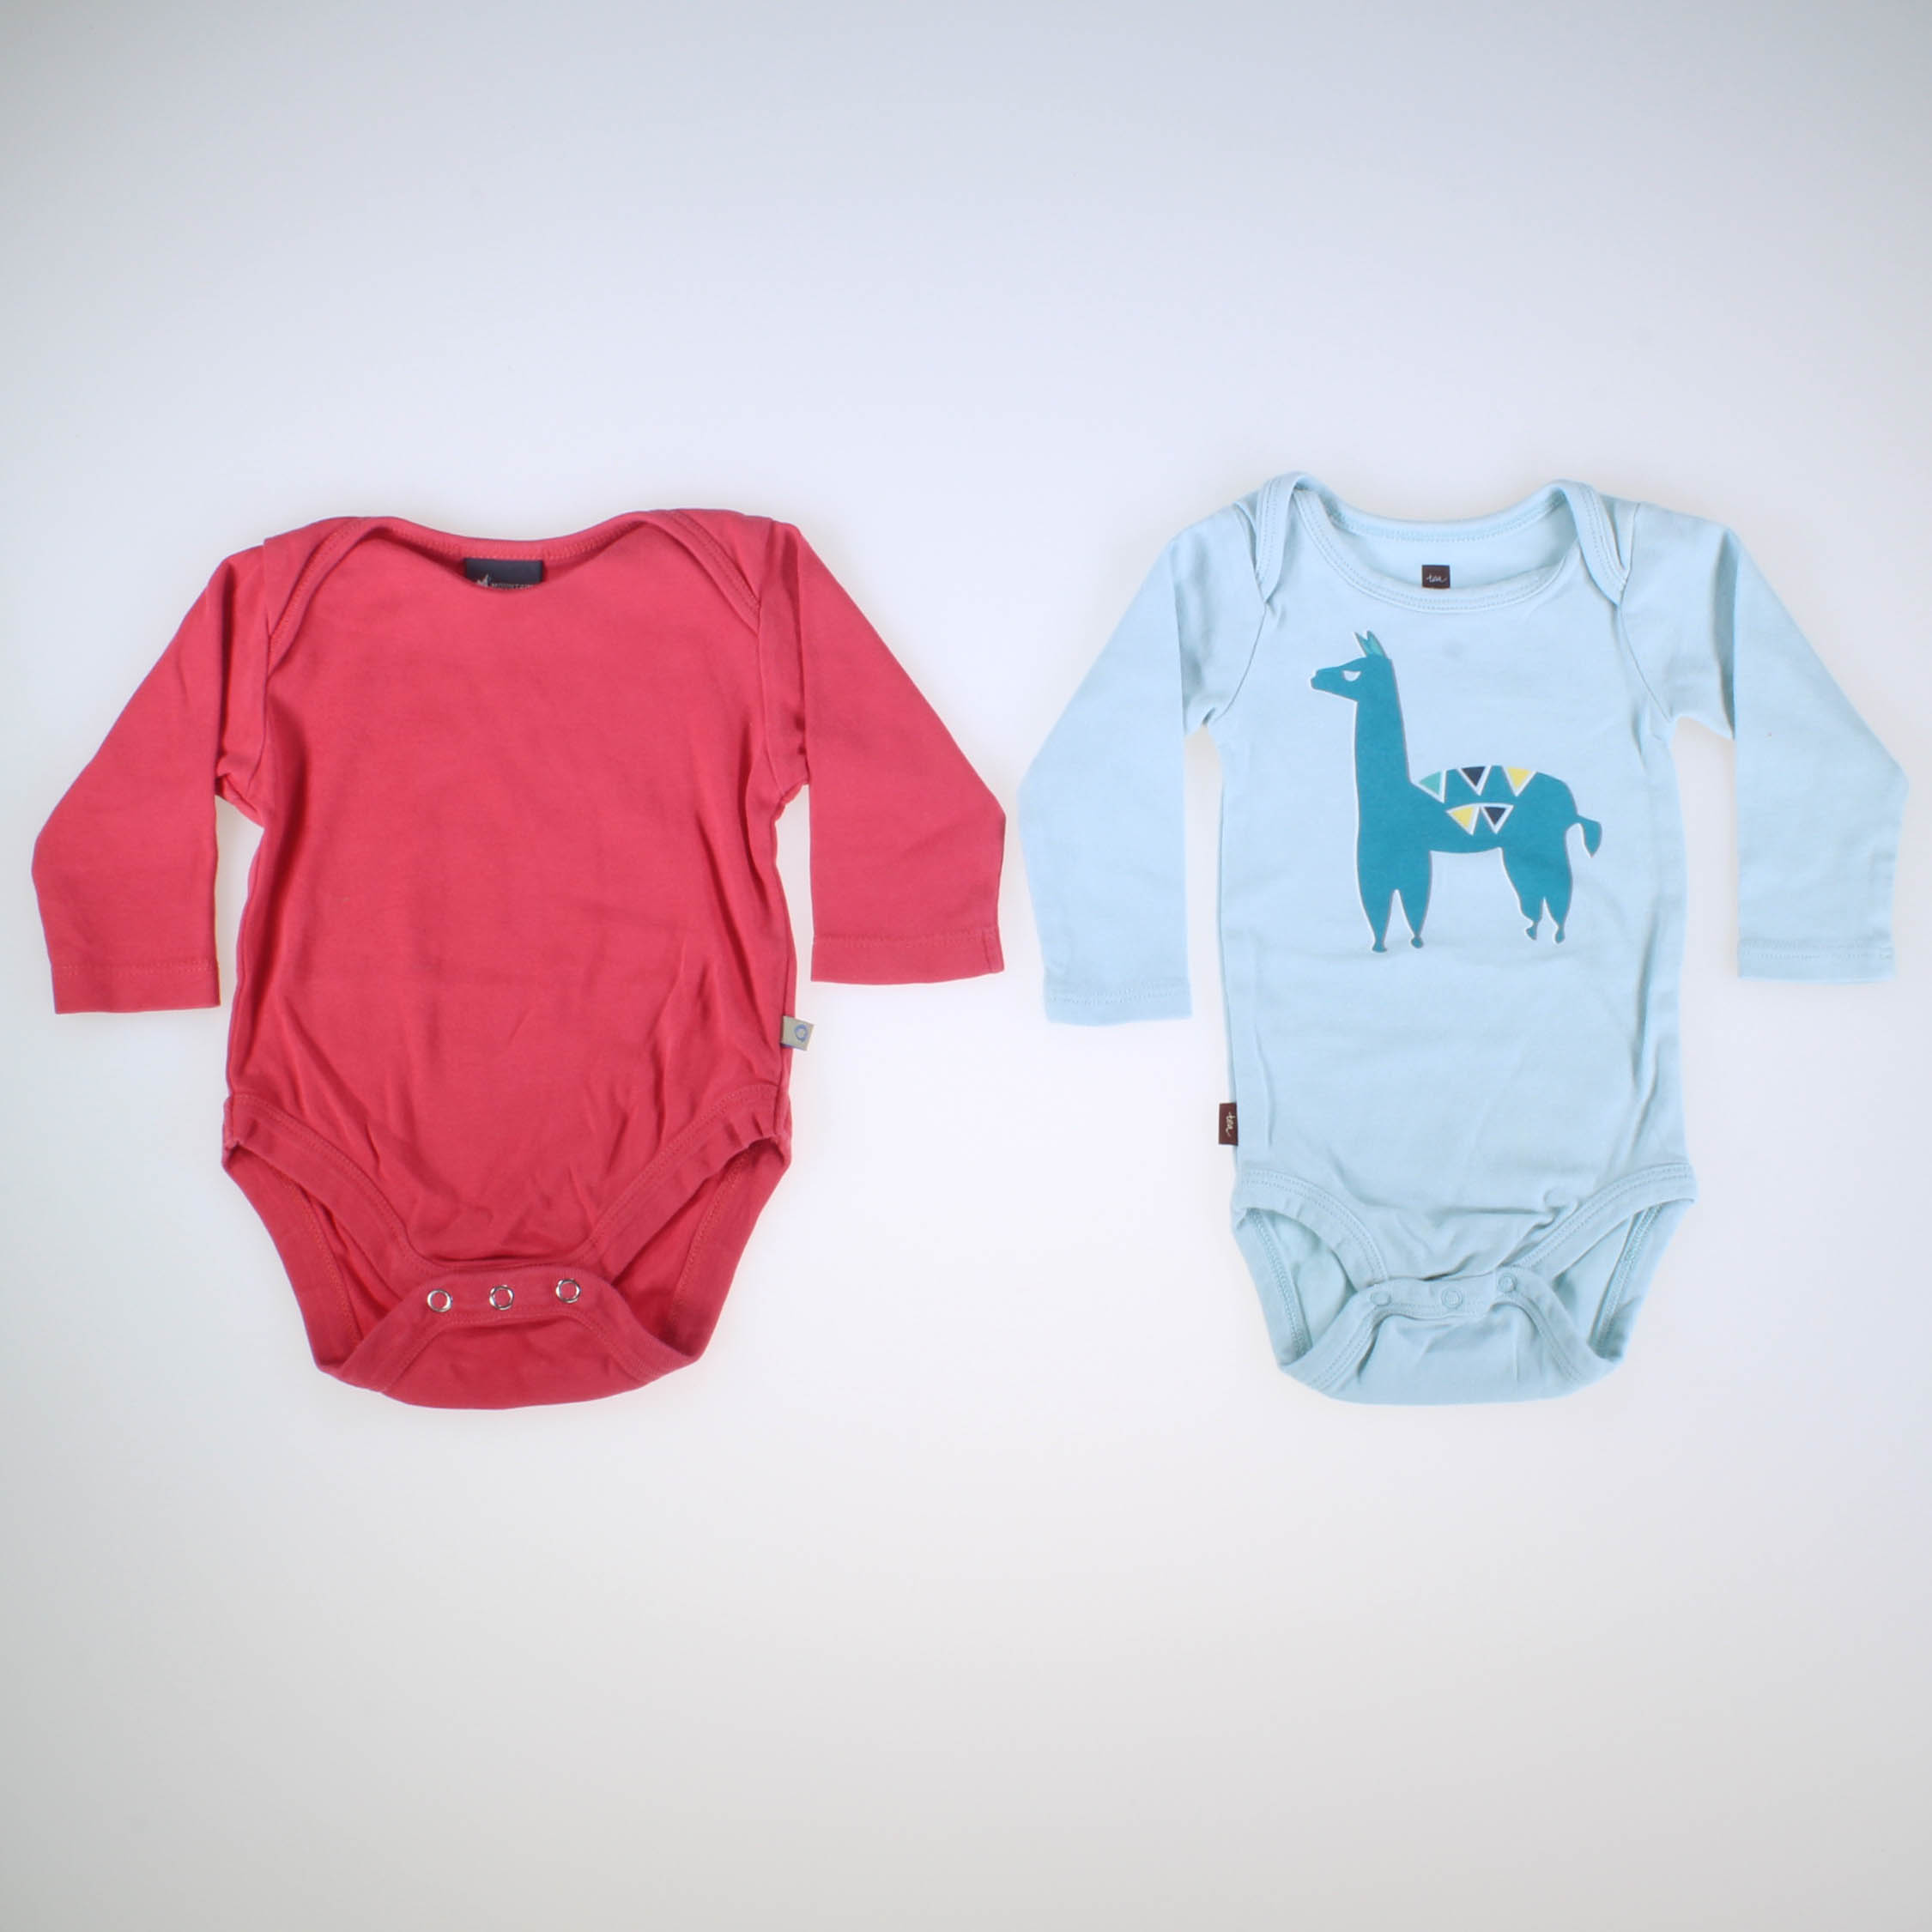 Pre-owned Tea | Mountain Equipment Co-Op Unisex Light Blue | Red Onesie size: 3-6 Months - image 1 of 1